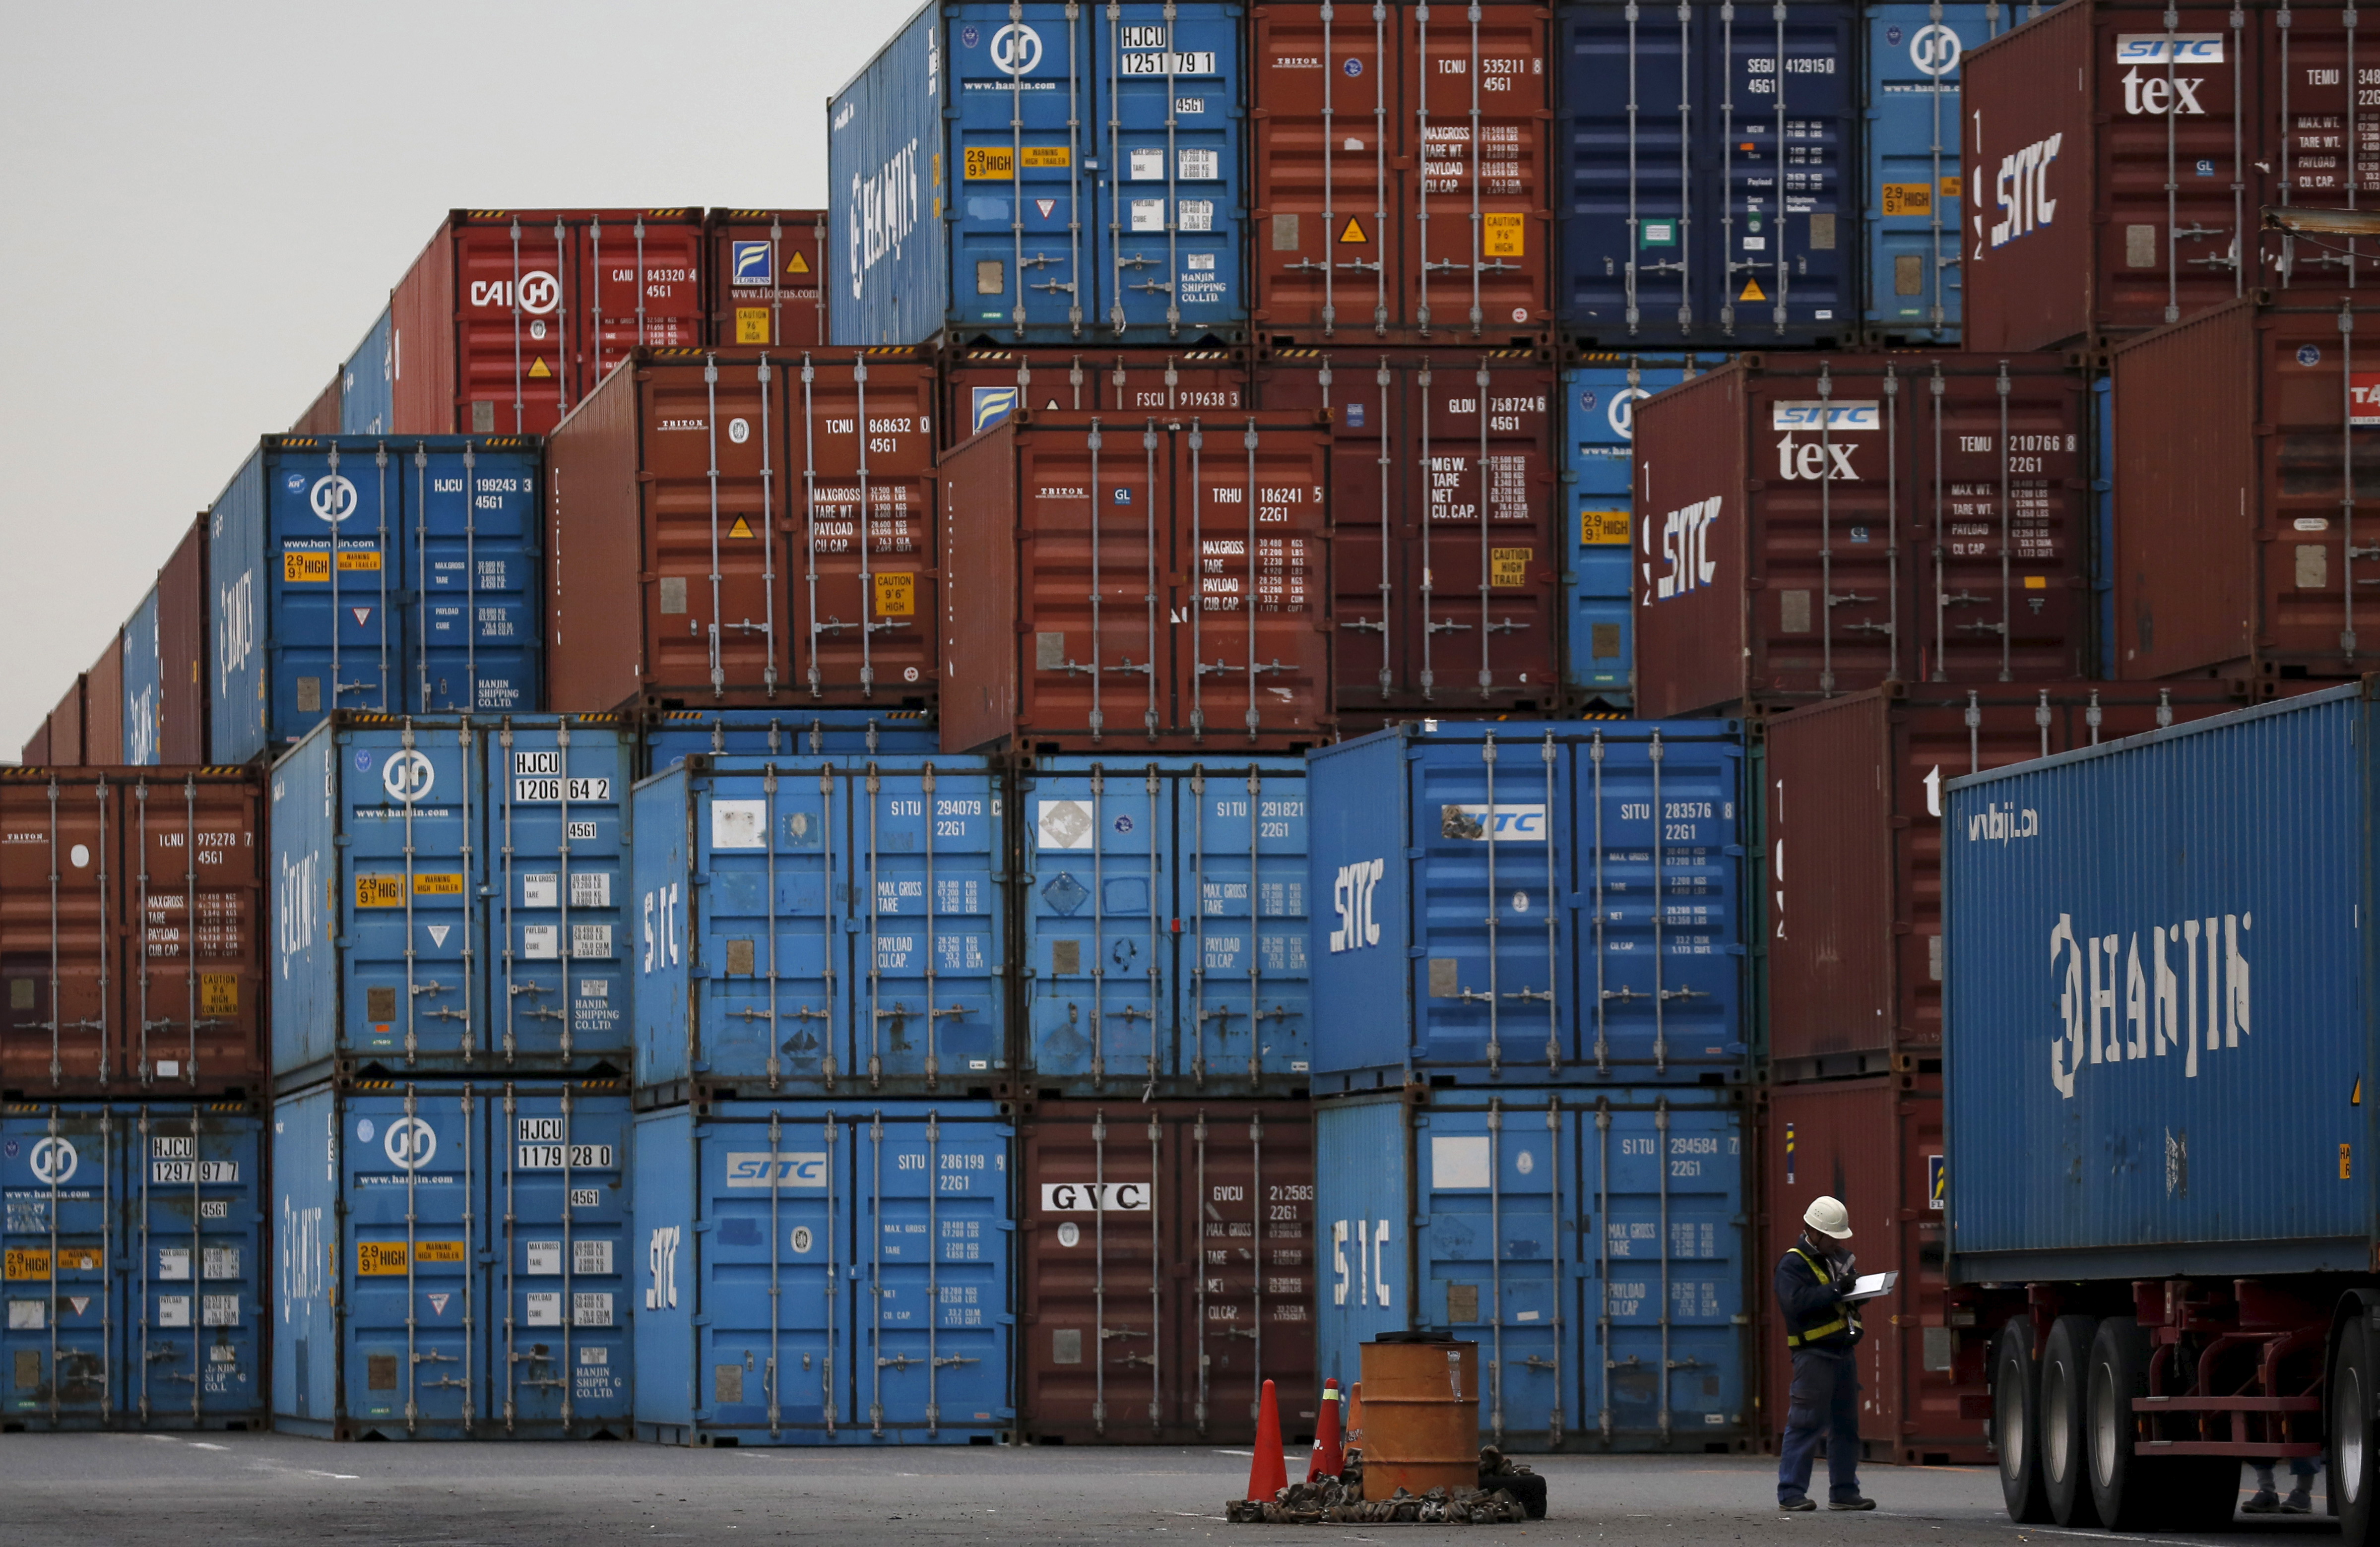 A laborer works in a container area at a port in Tokyo